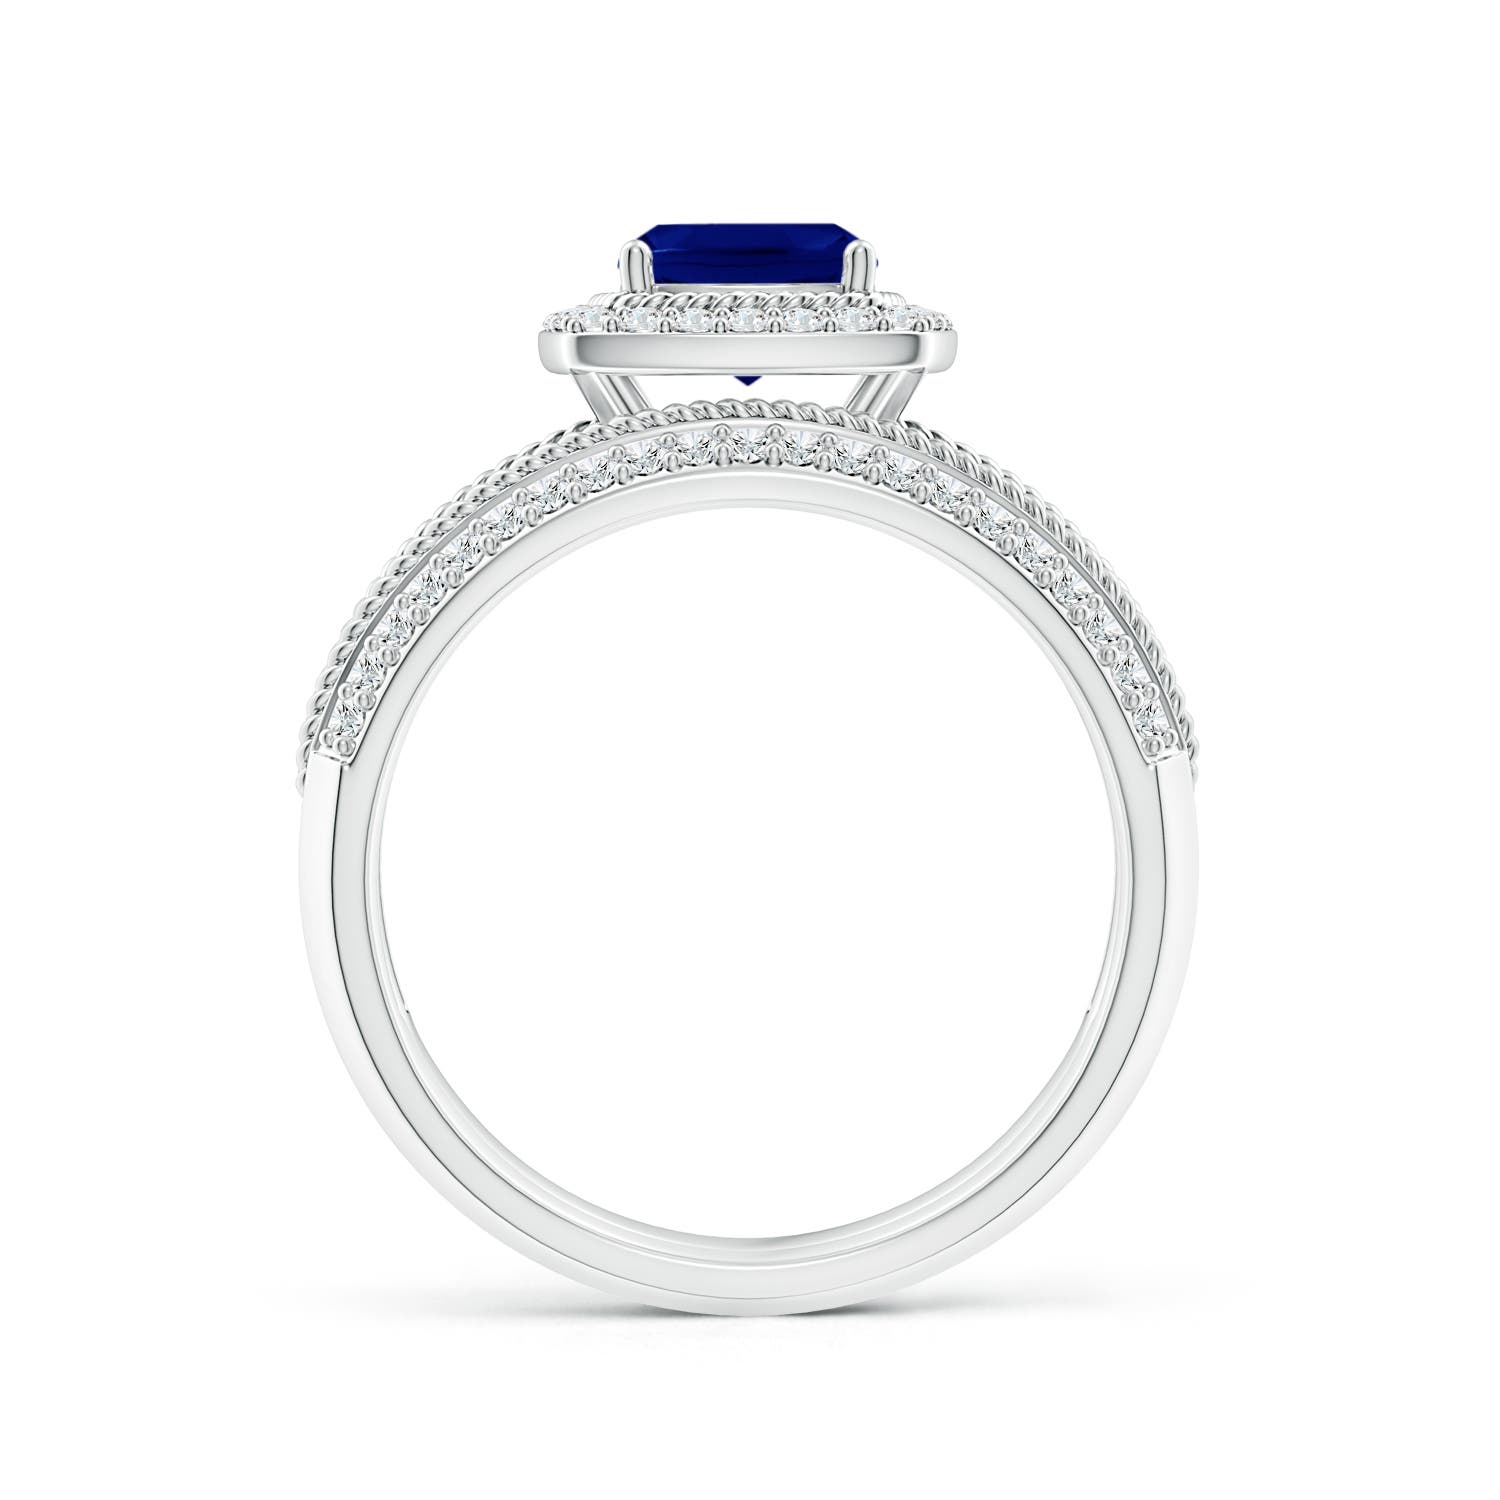 AAA - Blue Sapphire / 1.63 CT / 14 KT White Gold